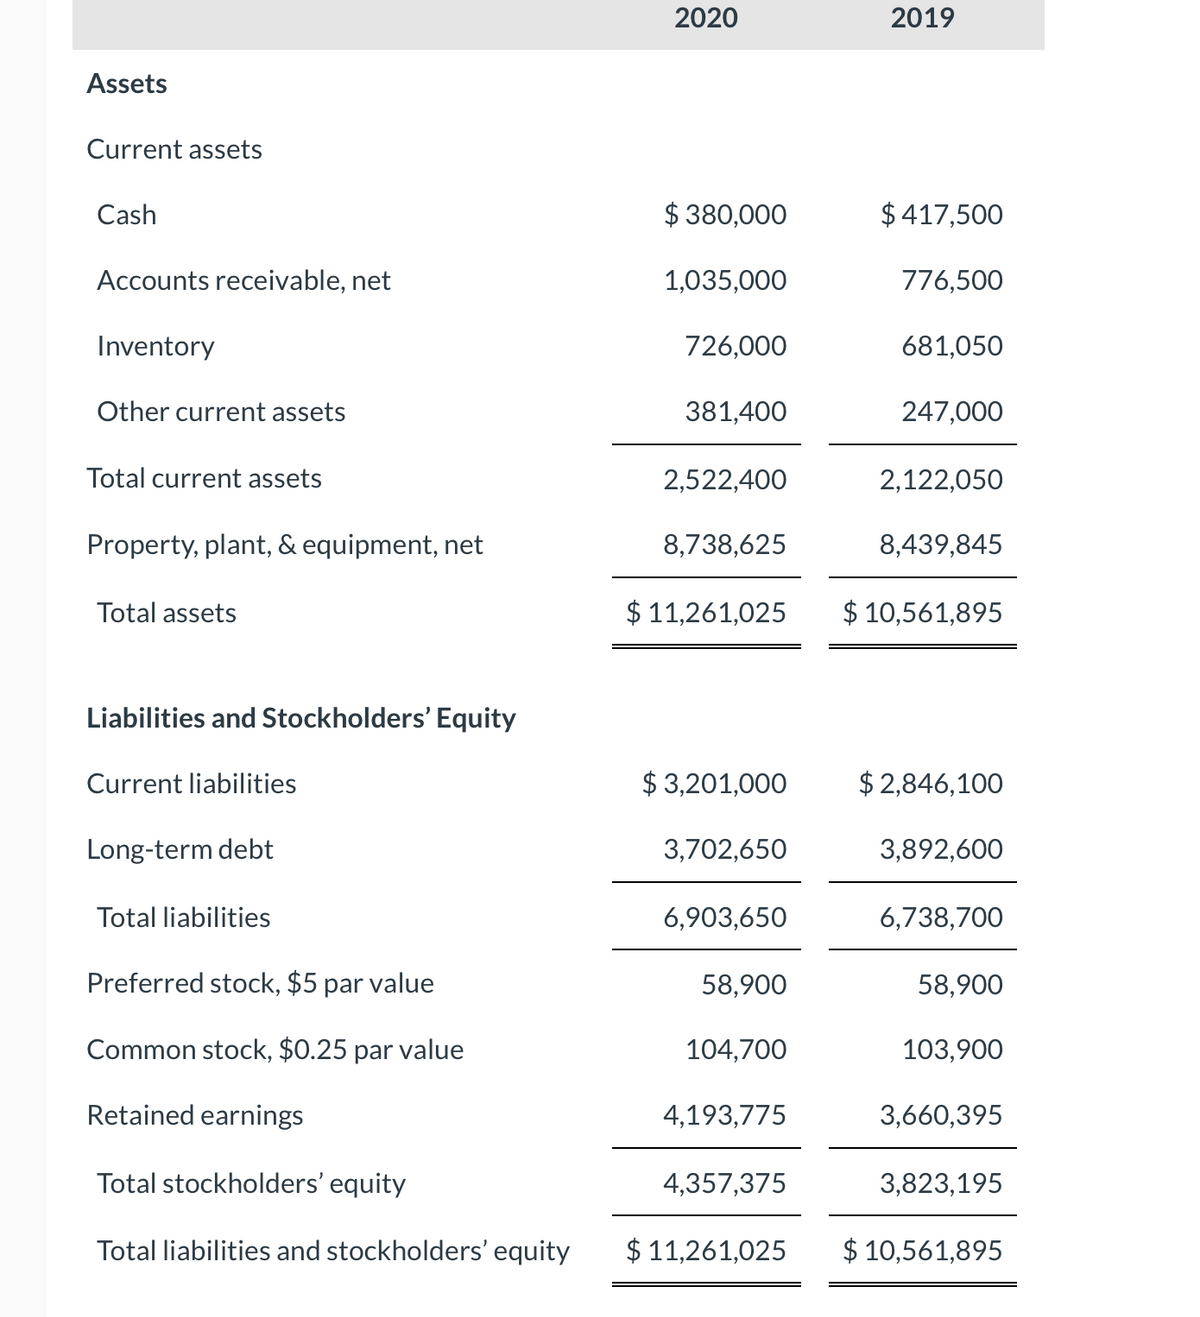 2020
2019
Assets
Current assets
Cash
$ 380,000
$ 417,500
Accounts receivable, net
1,035,000
776,500
Inventory
726,000
681,050
Other current assets
381,400
247,000
Total current assets
2,522,400
2,122,050
Property, plant, & equipment, net
8,738,625
8,439,845
Total assets
$ 11,261,025
$ 10,561,895
Liabilities and Stockholders' Equity
Current liabilities
$ 3,201,000
$ 2,846,100
Long-term debt
3,702,650
3,892,600
Total liabilities
6,903,650
6,738,700
Preferred stock, $5 par value
58,900
58,900
Common stock, $0.25 par value
104,700
103,900
Retained earnings
4,193,775
3,660,395
Total stockholders' equity
4,357,375
3,823,195
Total liabilities and stockholders' equity
$ 11,261,025
$ 10,561,895
